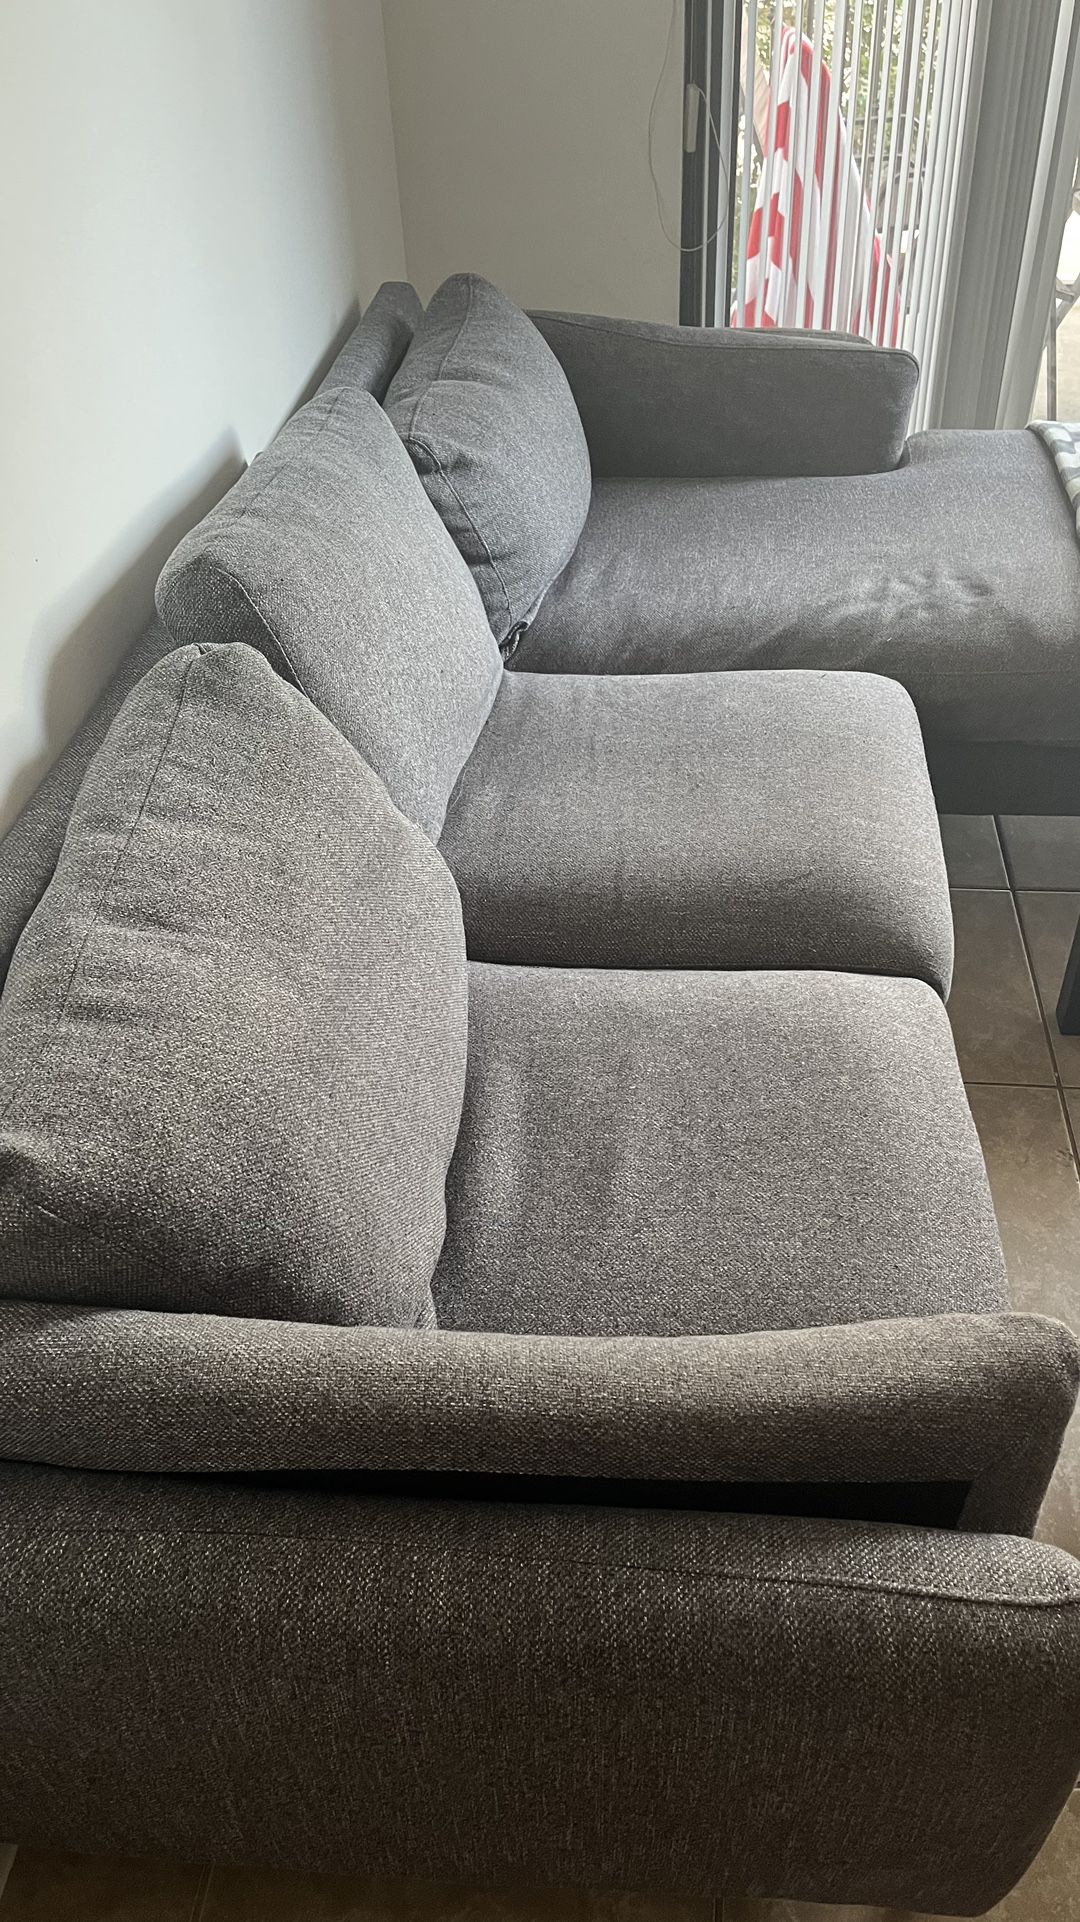 SALE- Couch for $50